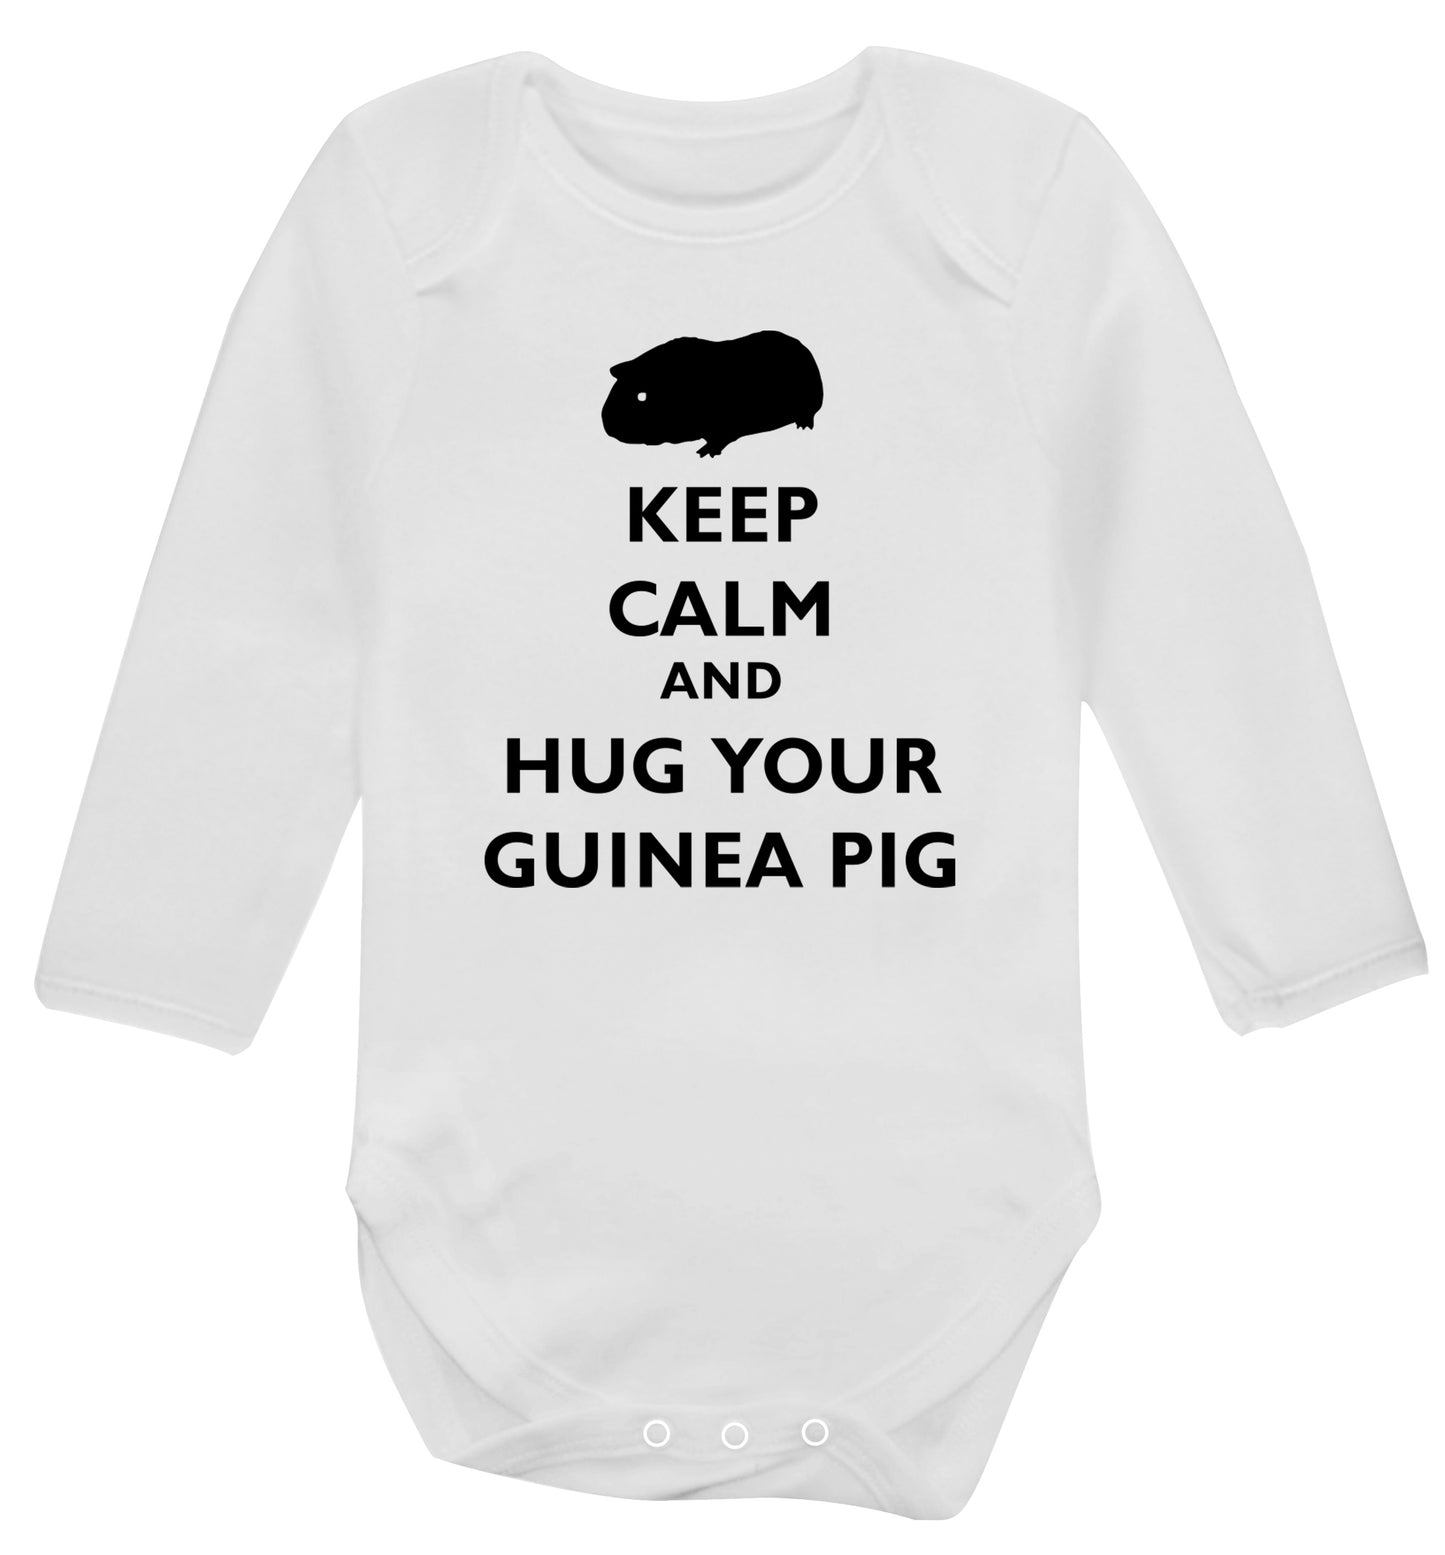 Keep calm and hug your guineapig Baby Vest long sleeved white 6-12 months